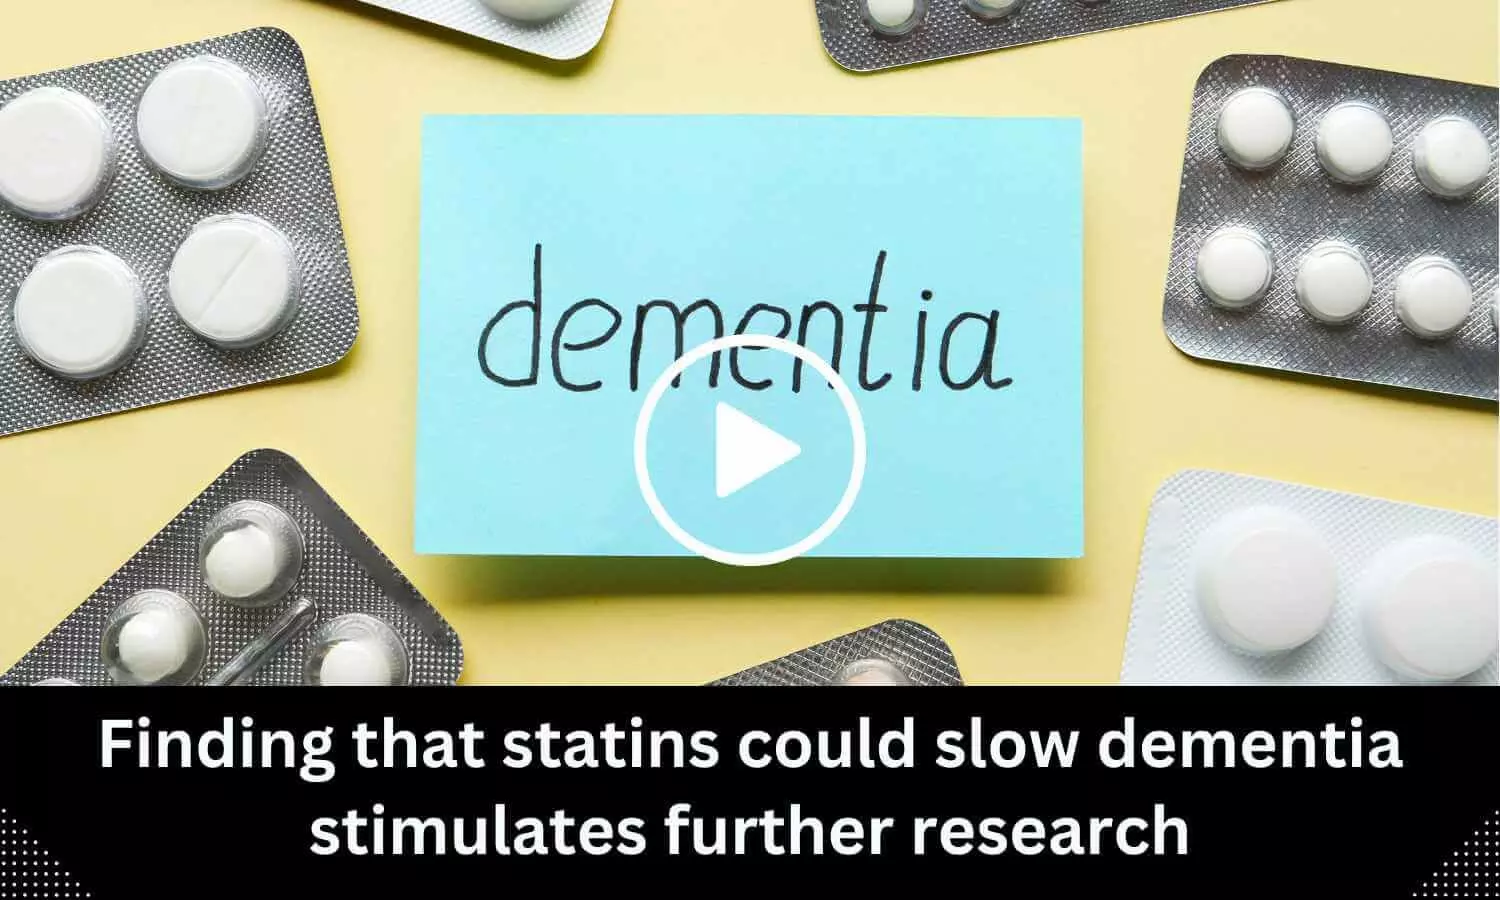 Finding that statins could slow dementia stimulates further research